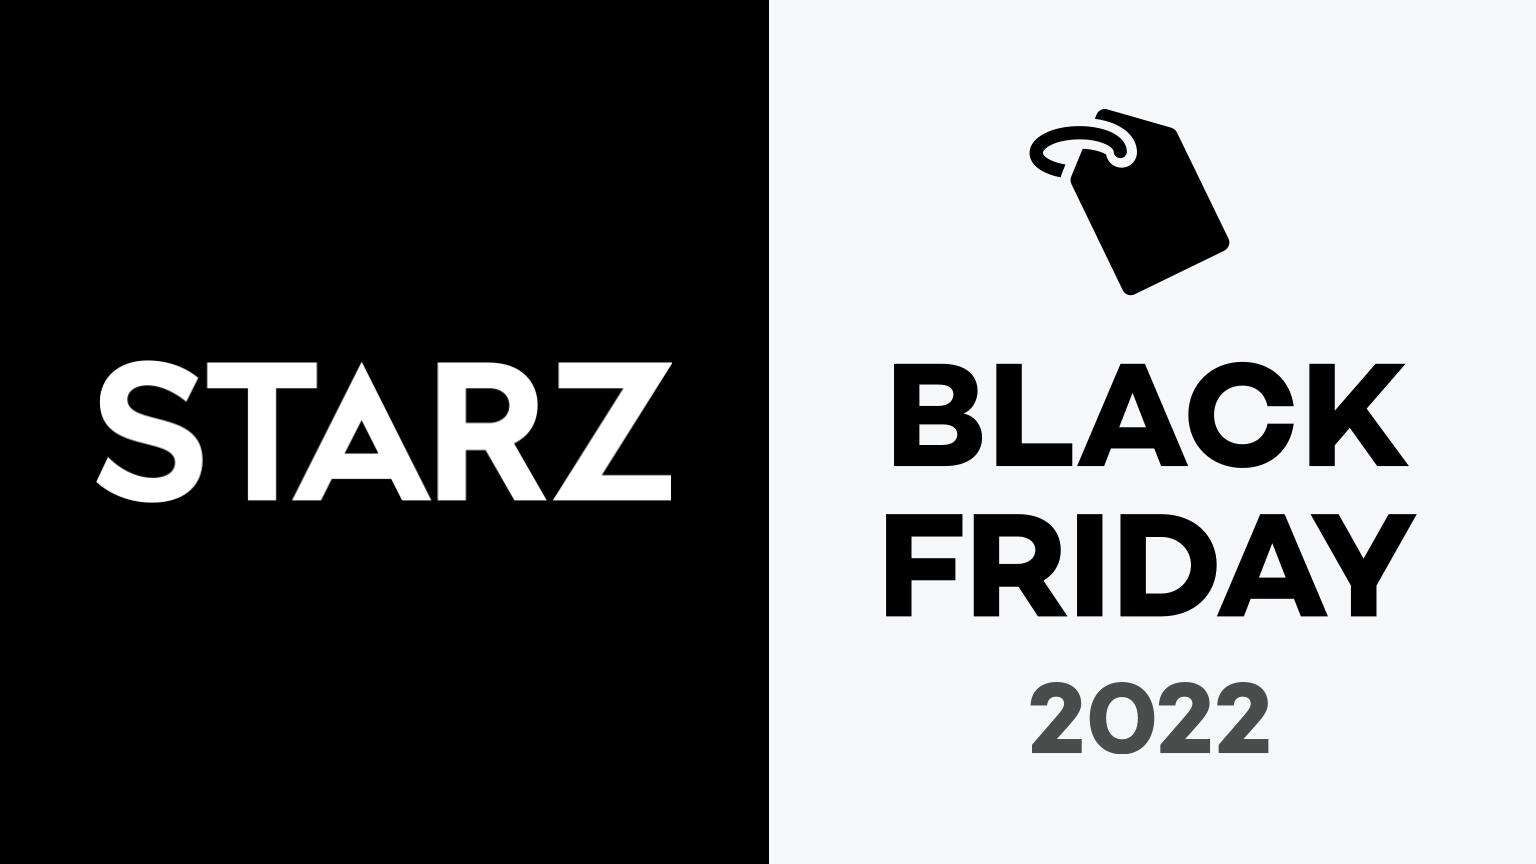 Starz Black Friday Deal Get 3 Months of STARZ for Only 5 a Month (45